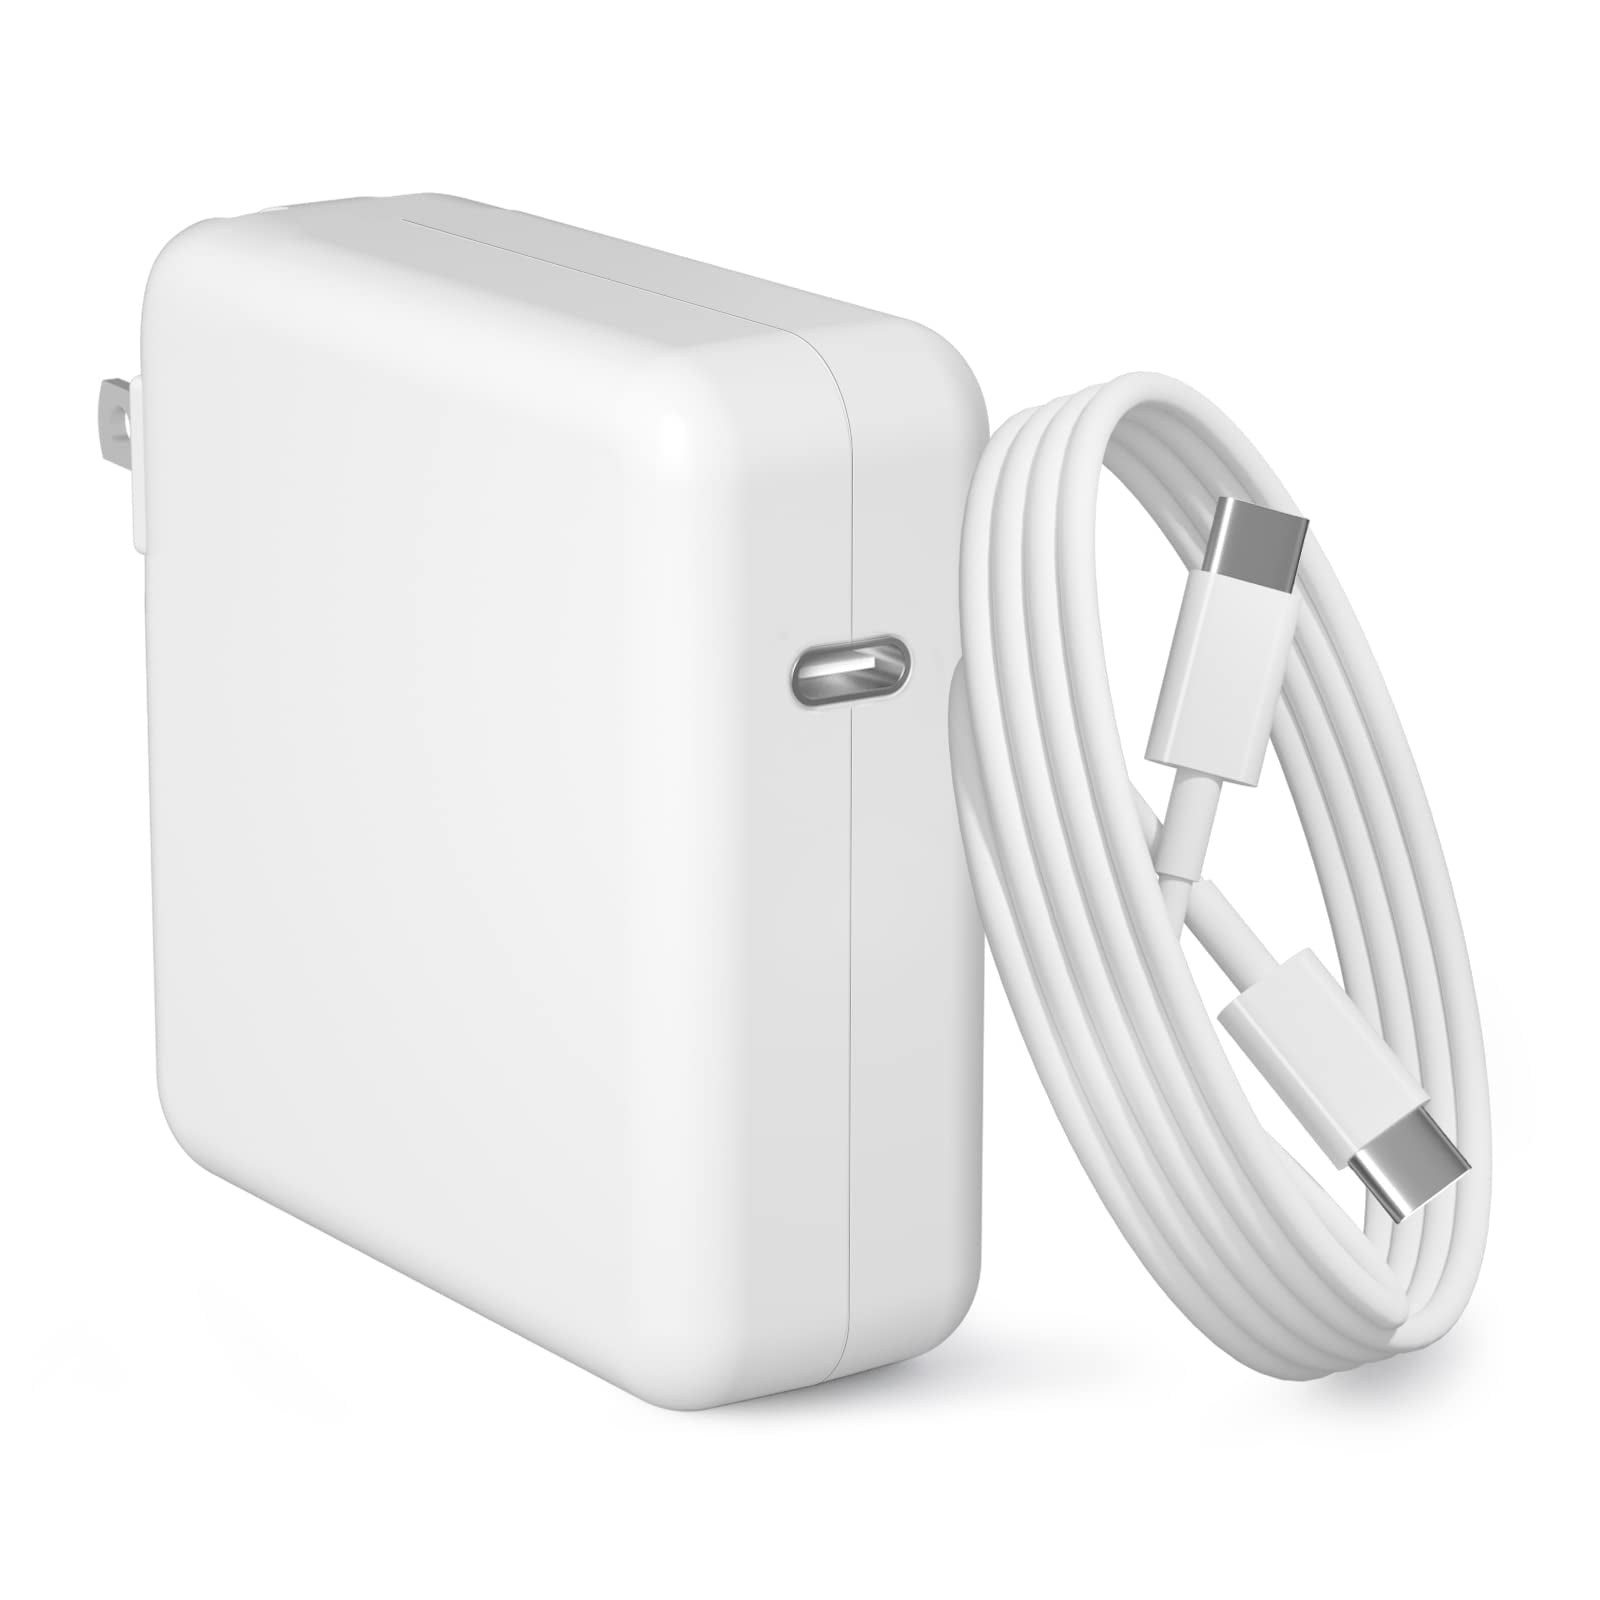 Mac Book Pro Charger,96W USBC Power Adapter Compatible with MacBook